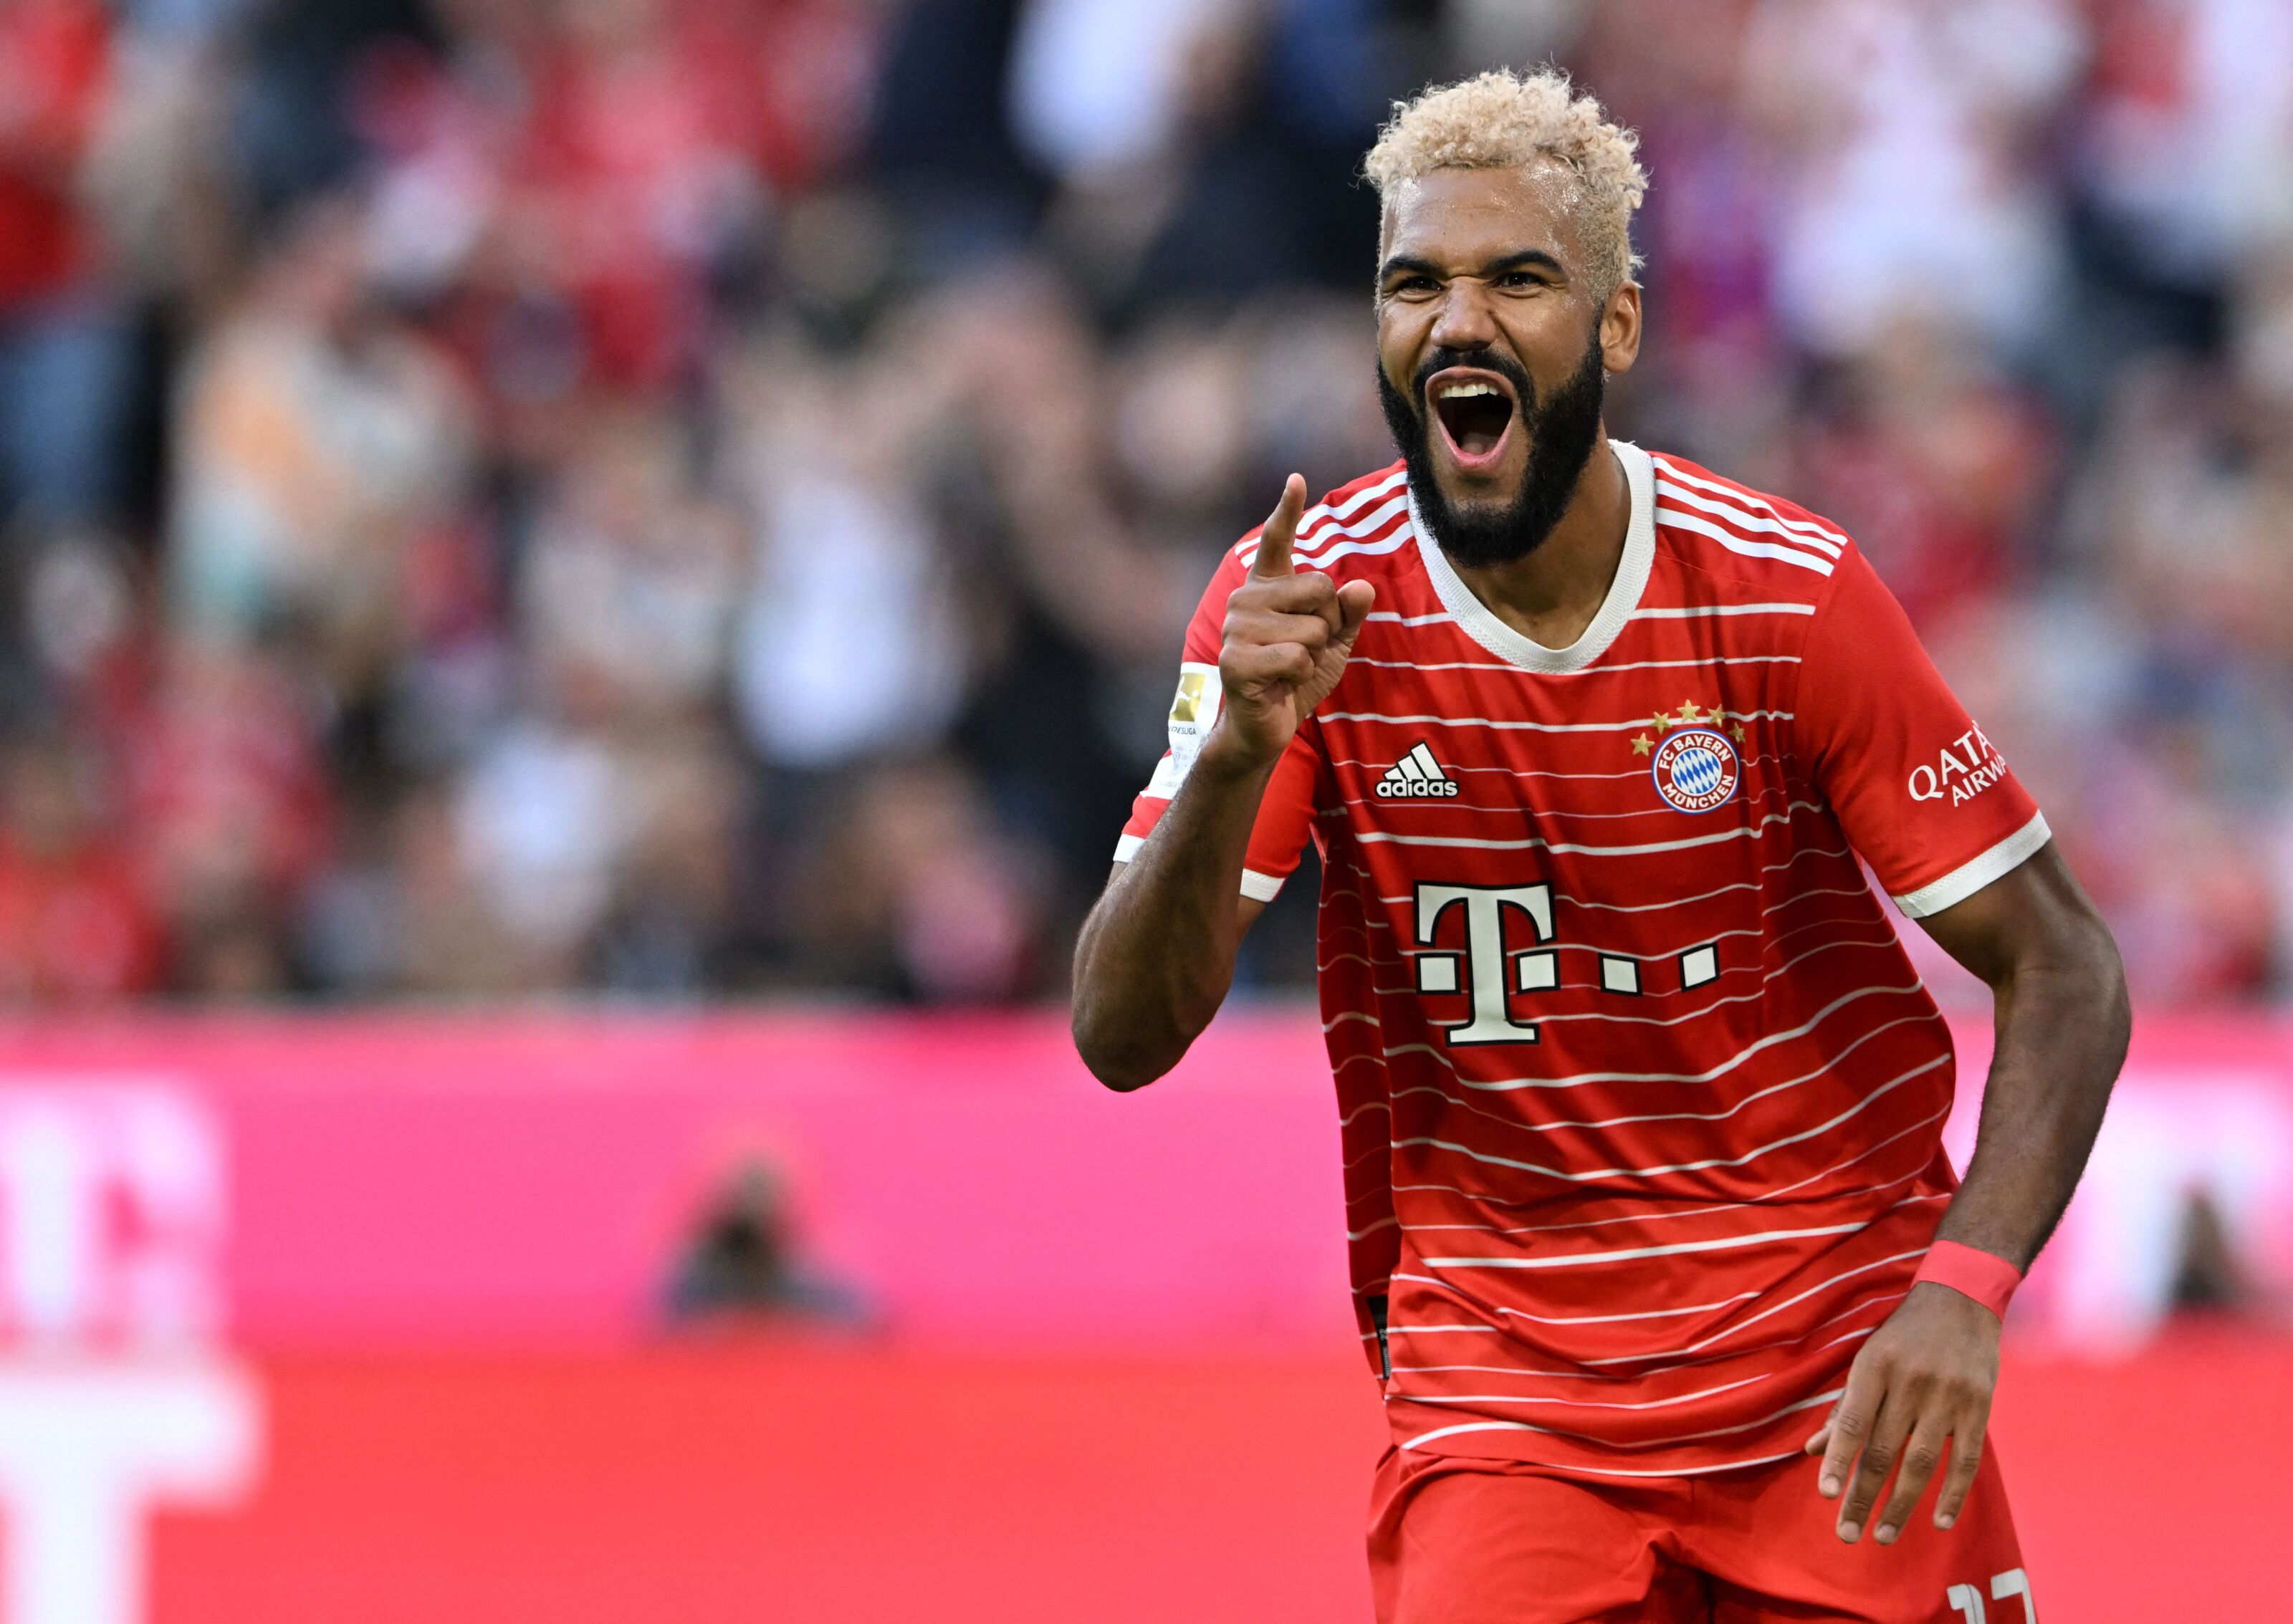 Bayern Munich wants to hand new deal to Eric Maxim Choupo-Moting